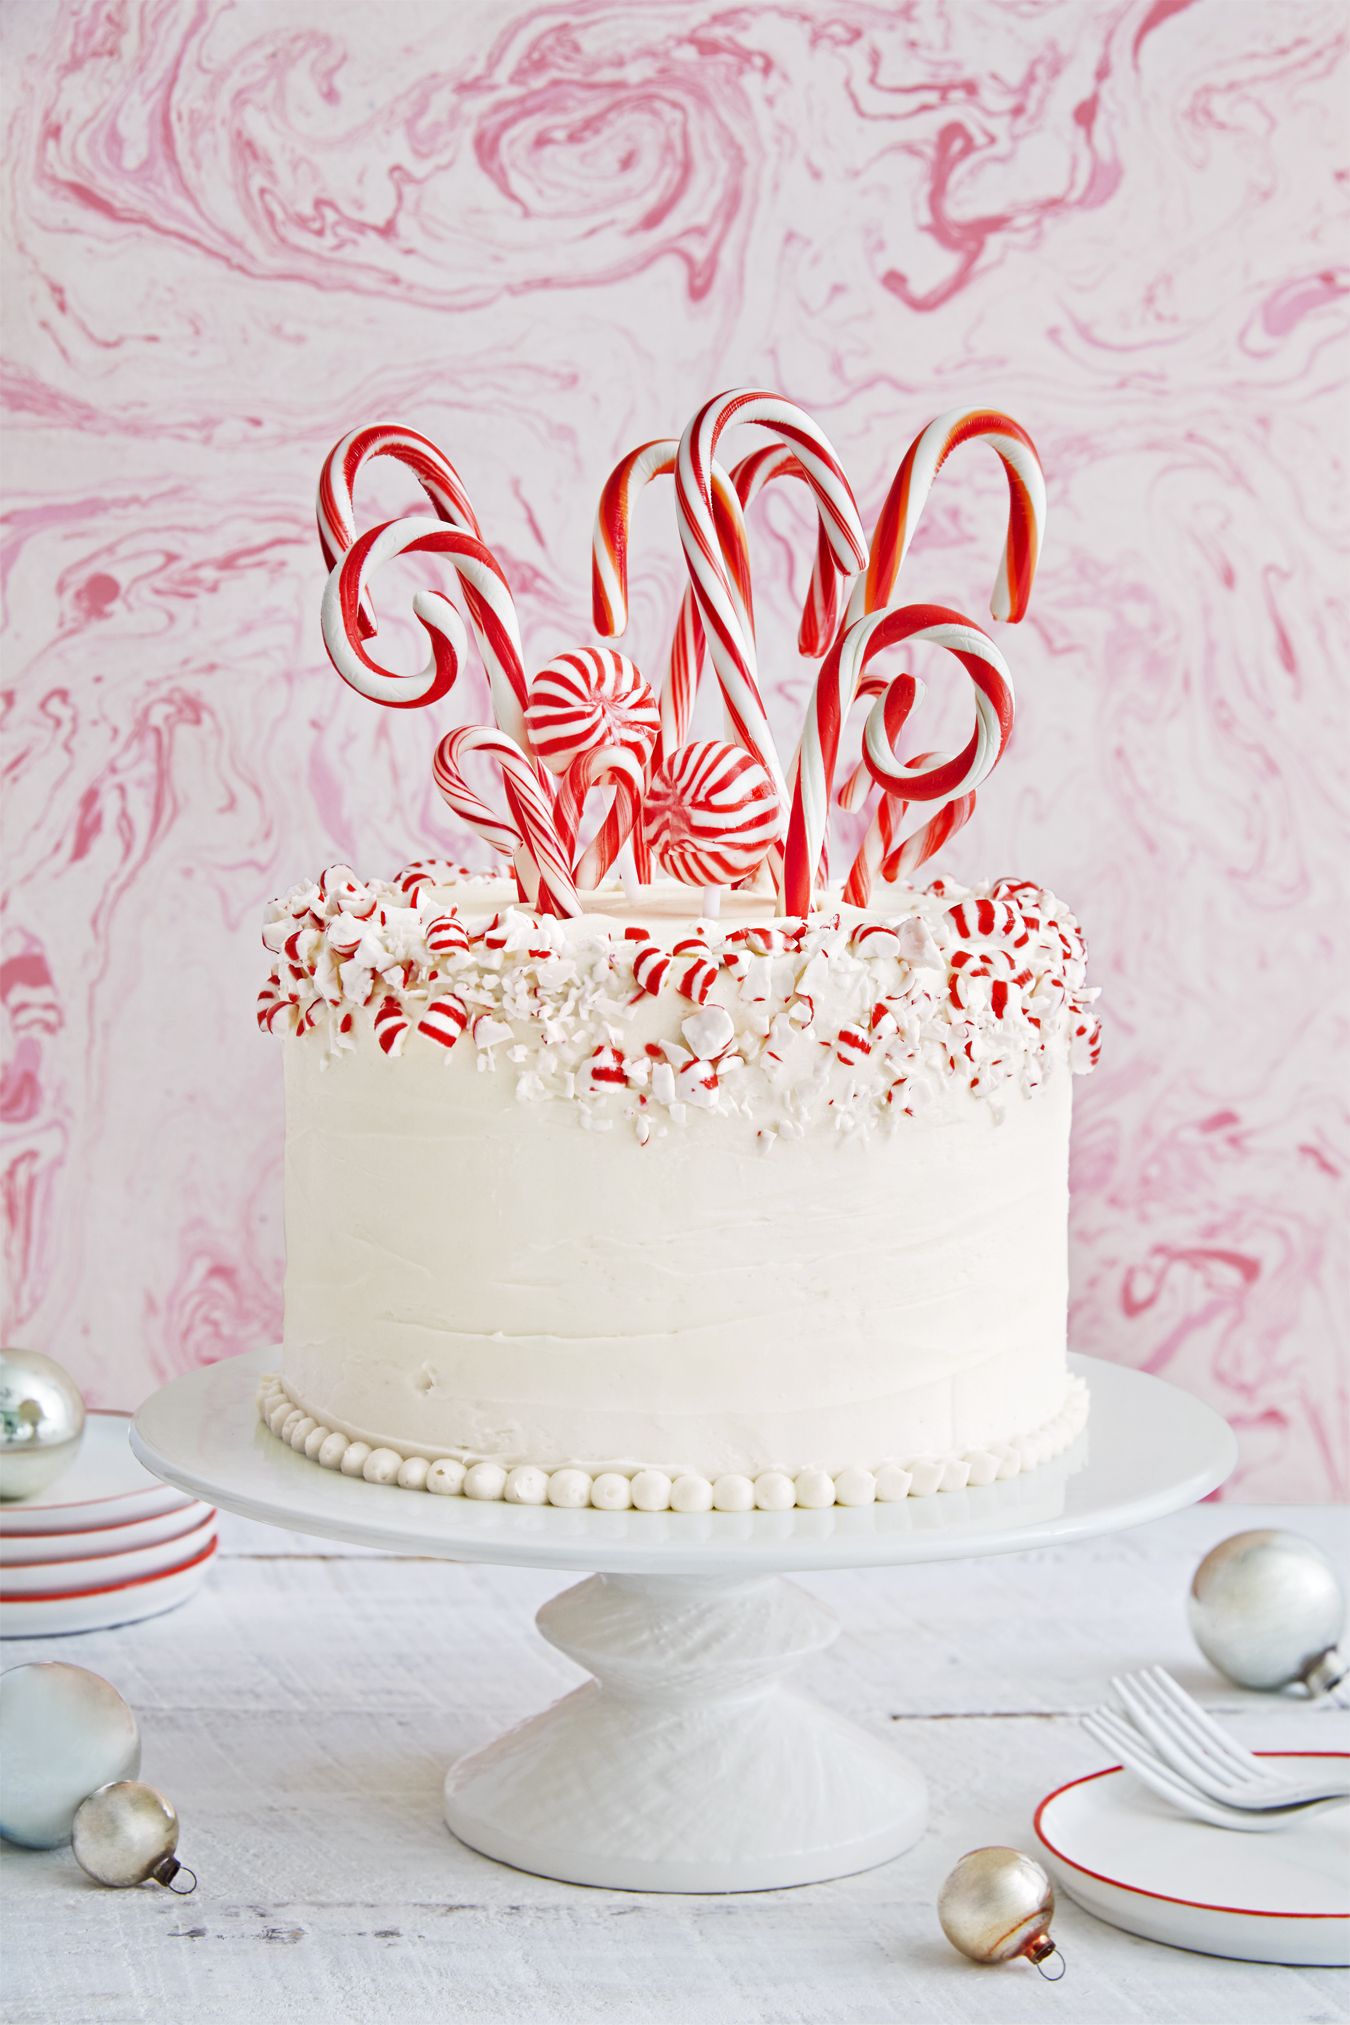 Best Candy Cane Forest Cake Recipe How To Make Candy Cane Forest Cake Countryliving Com